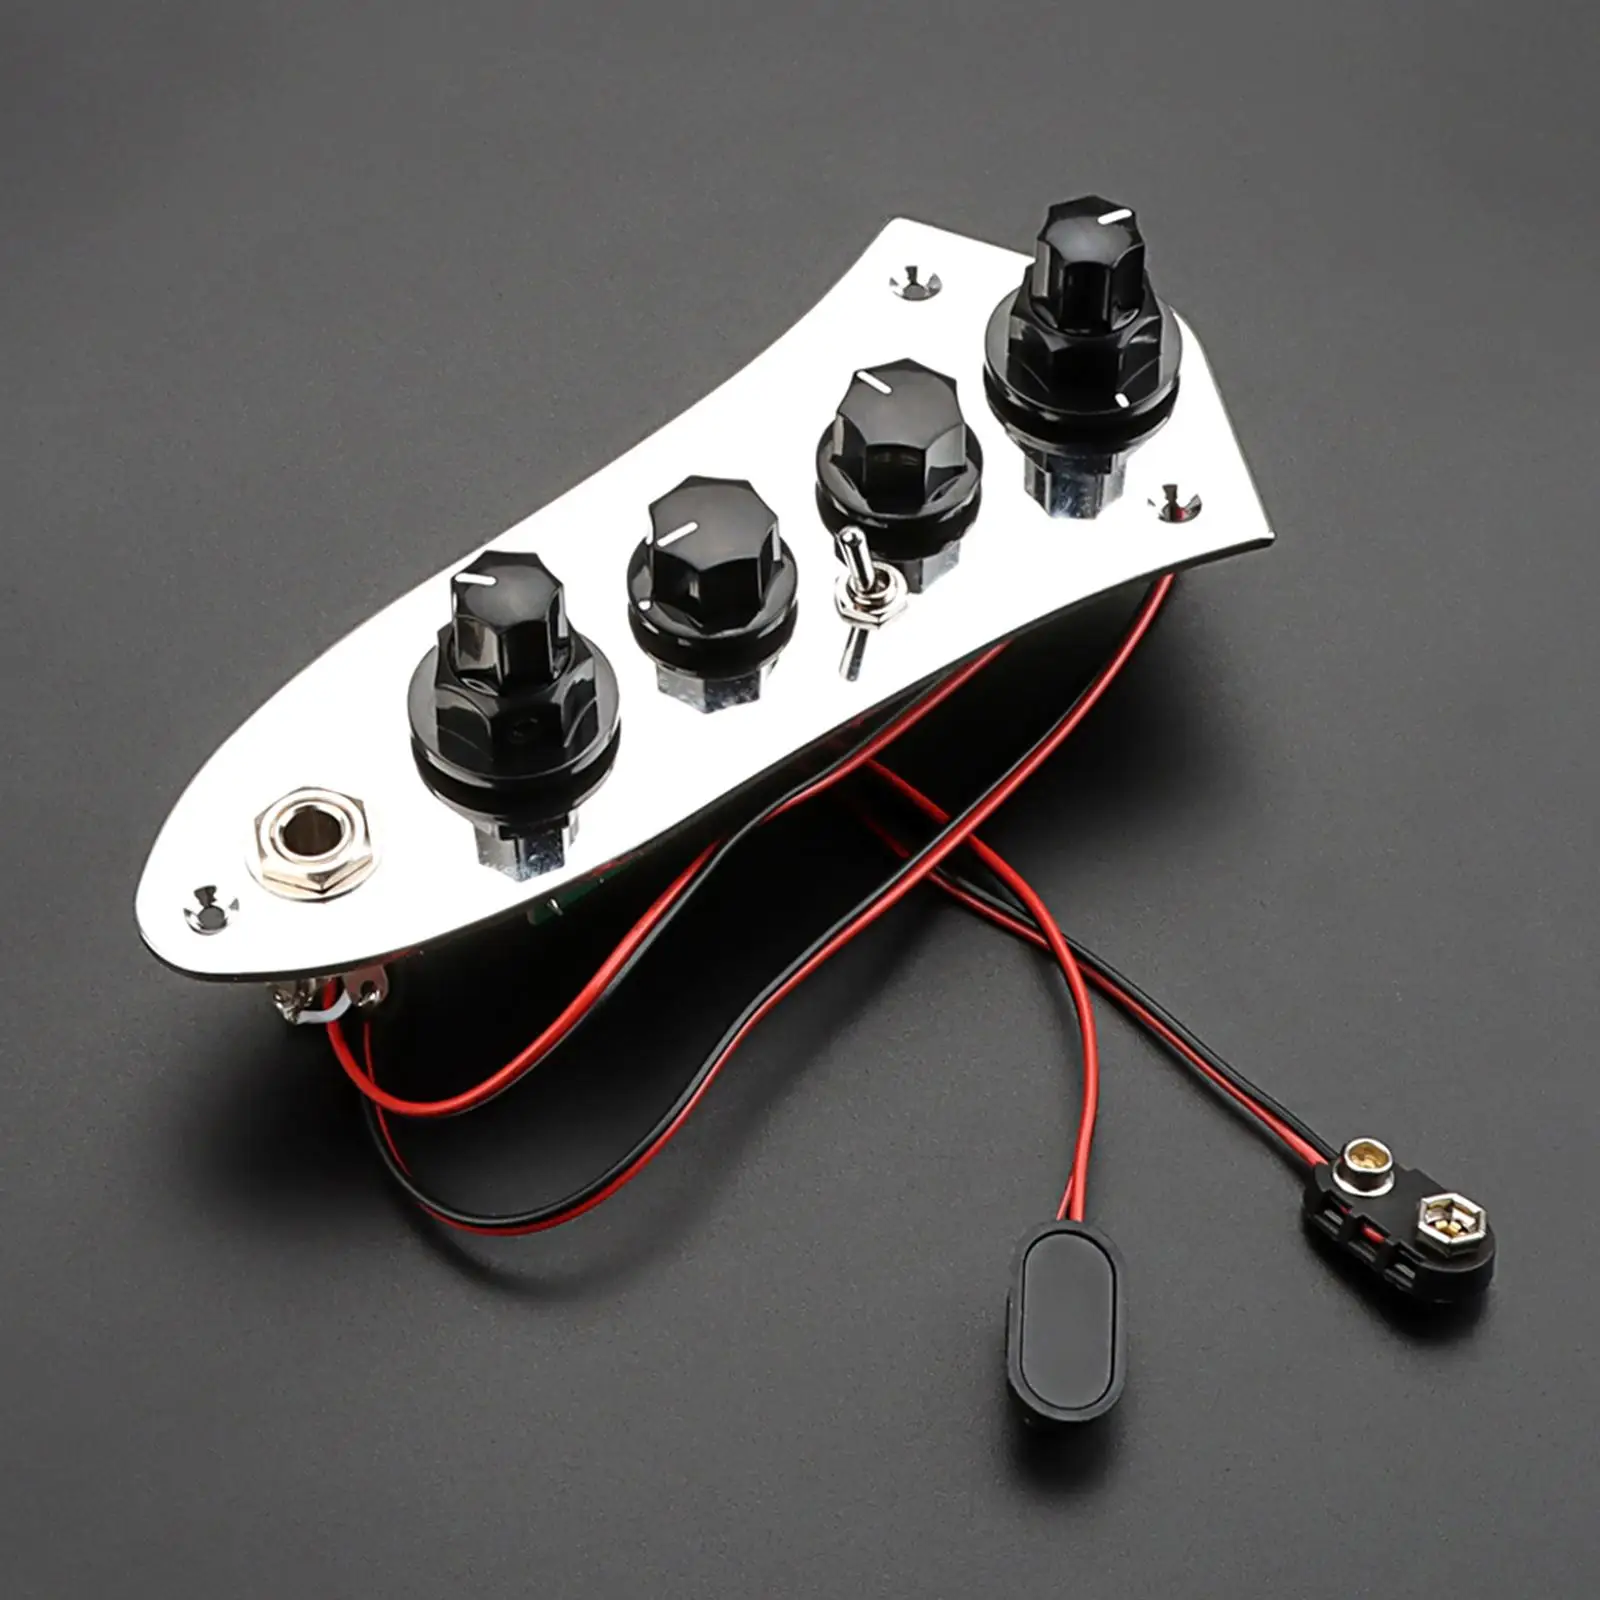 Guitar Bass Control Plate Pre Wired Retro Wired Switch Control Plate Assembly Wiring Harness Switch Knob for Musical Instrument